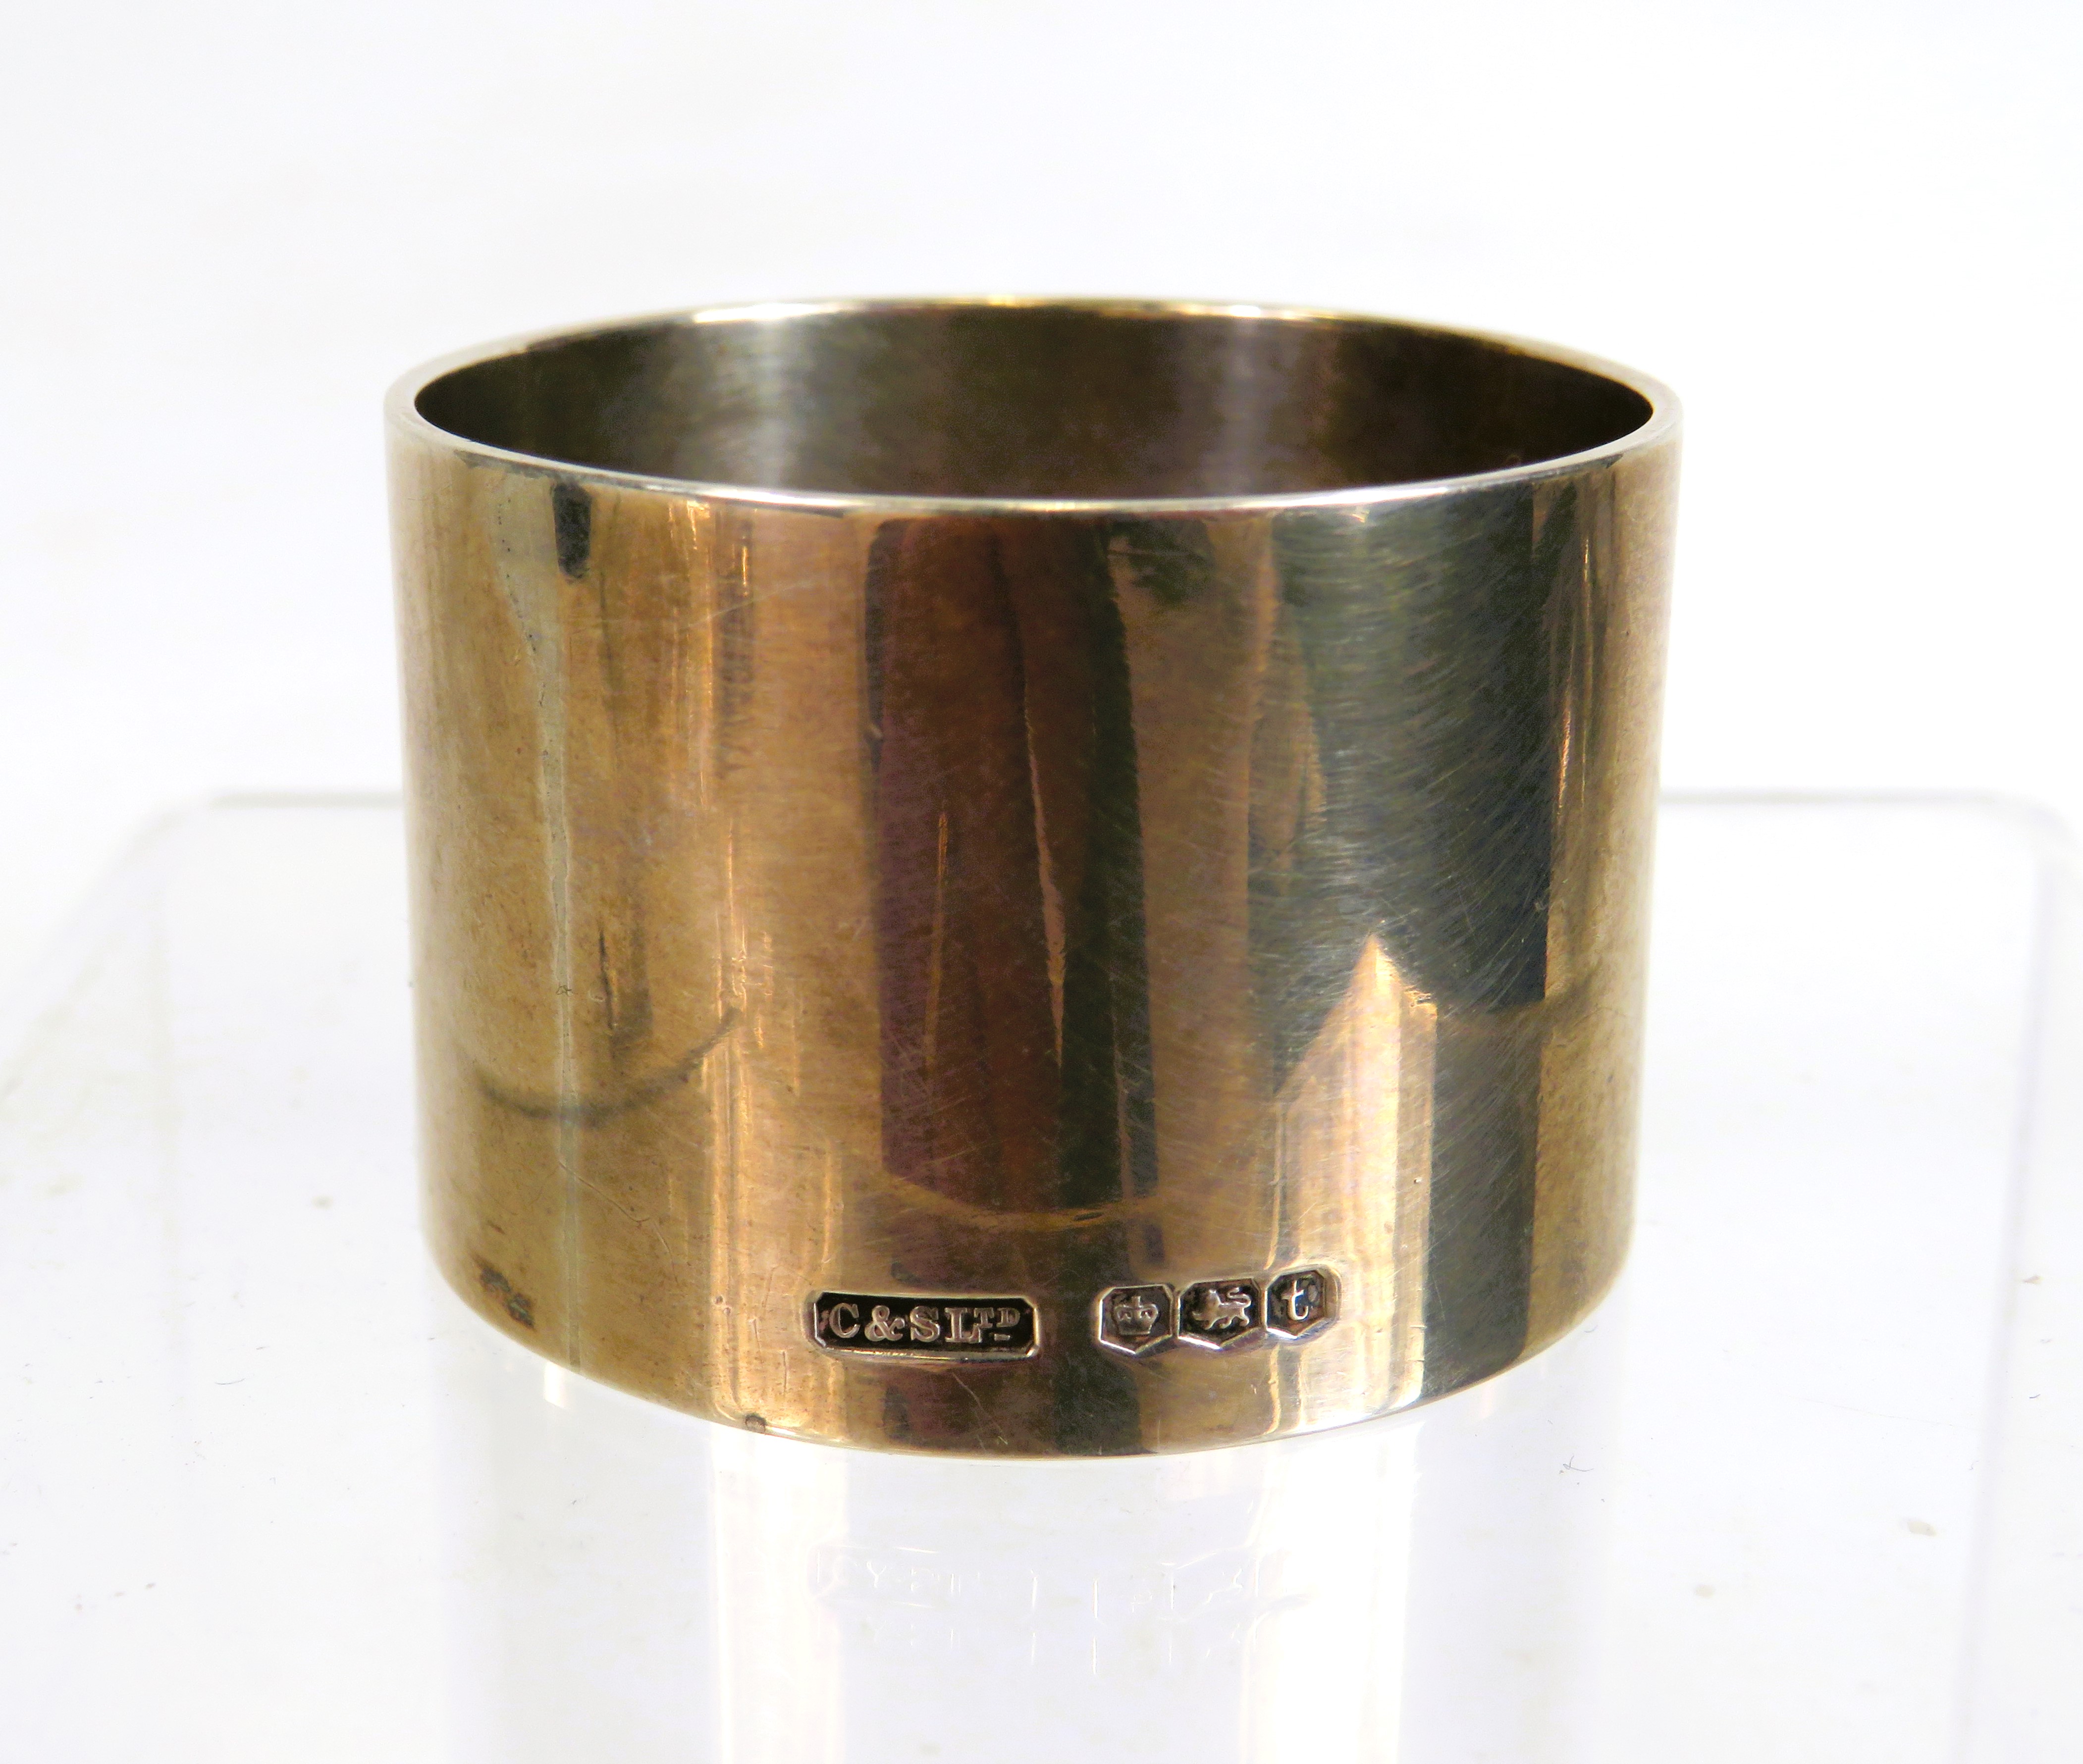 Thick Solid Silver Napkin ring with Hallmark for Sheffield. Weighs 48g